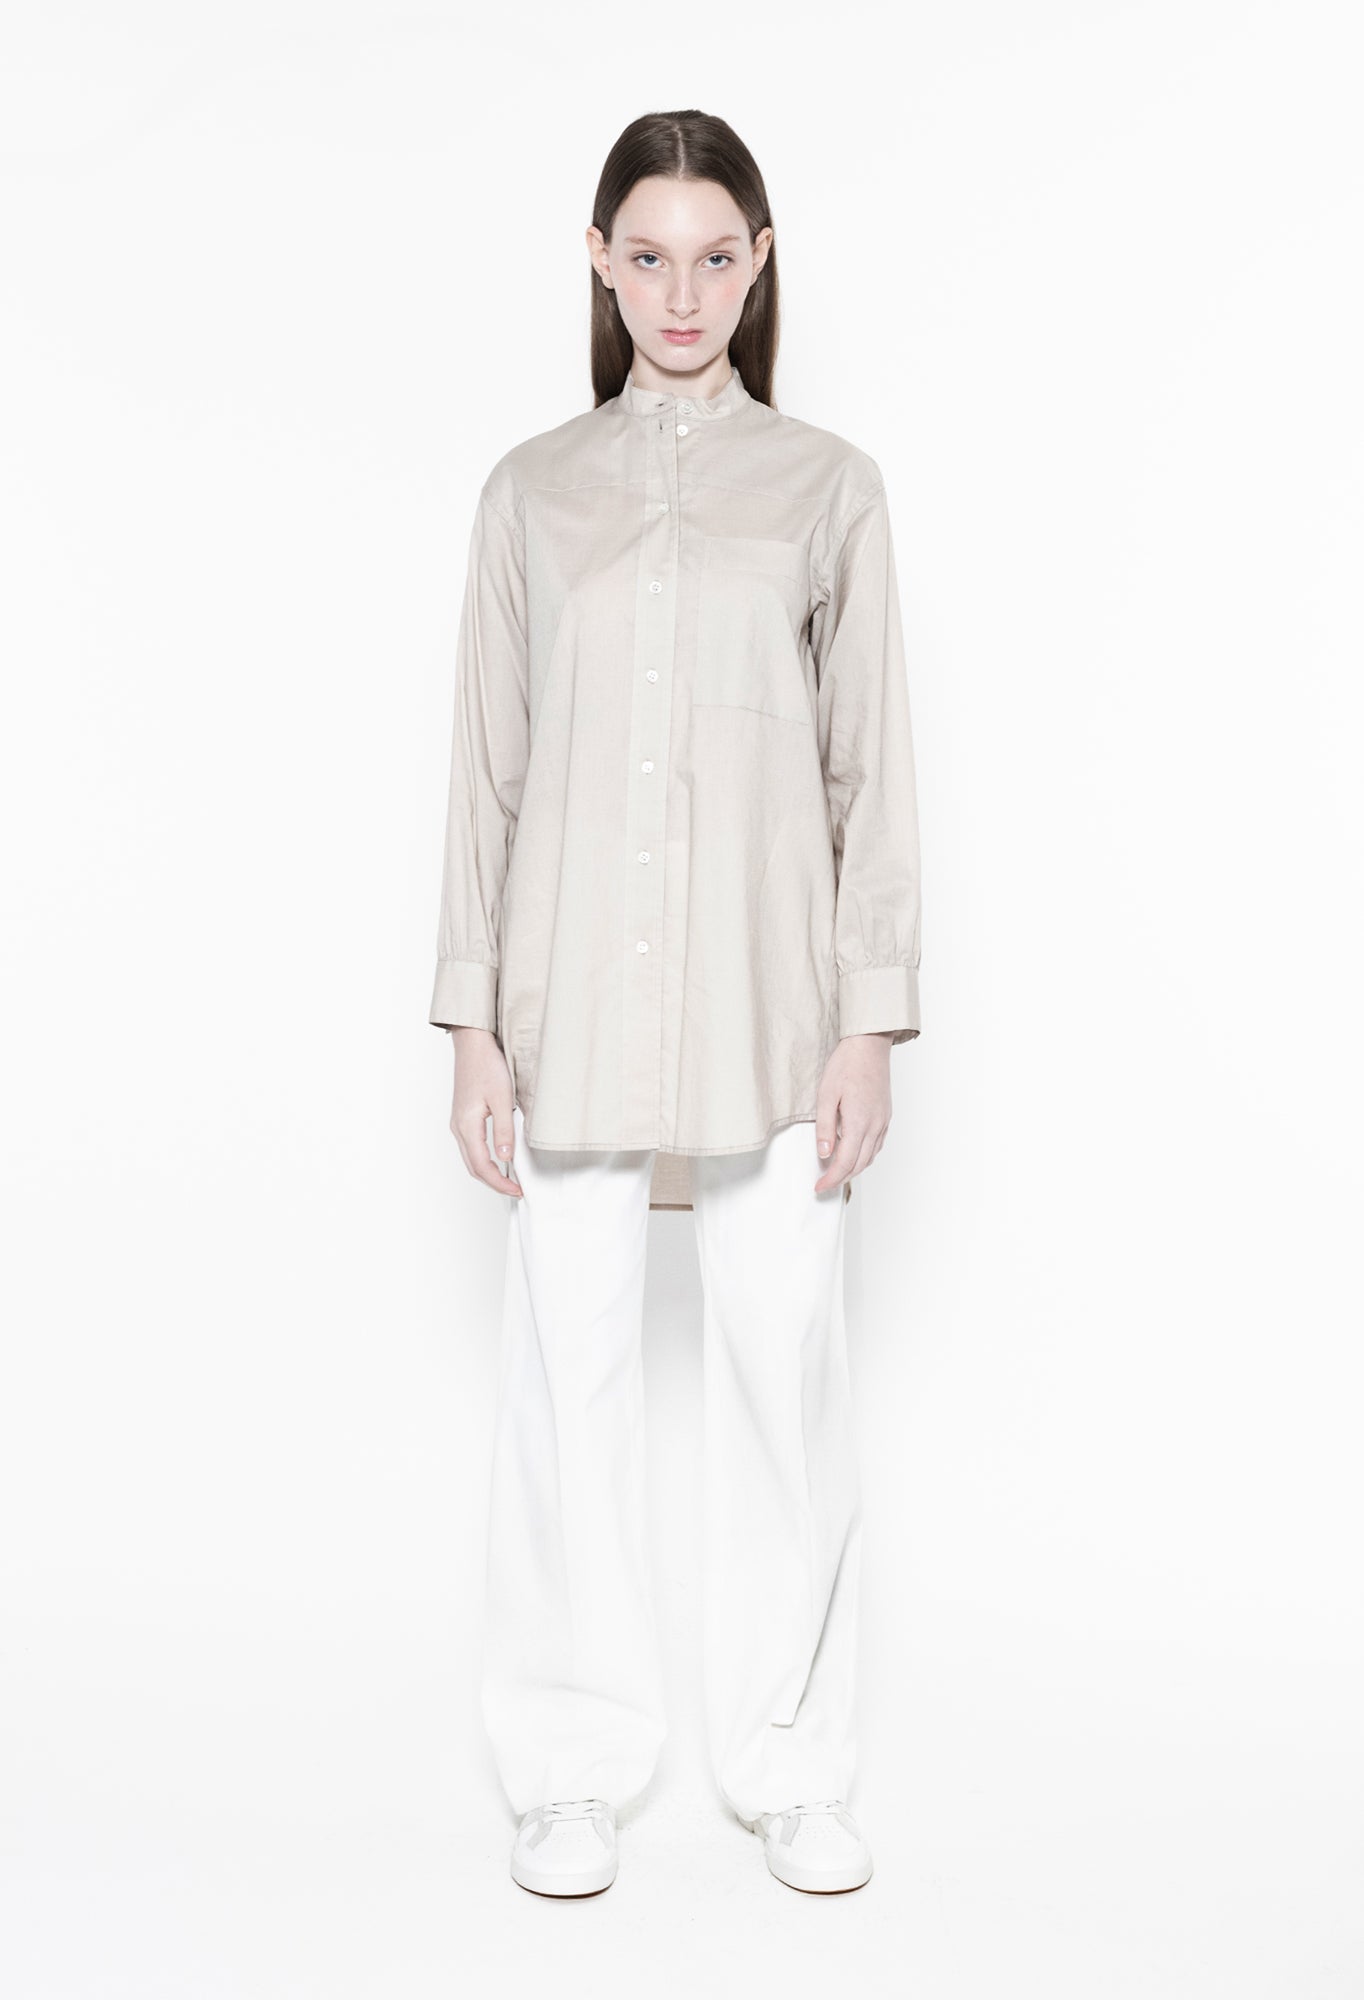 ZORAN - Stand Collar Long Sleeve Cotton Shirt in Ivory